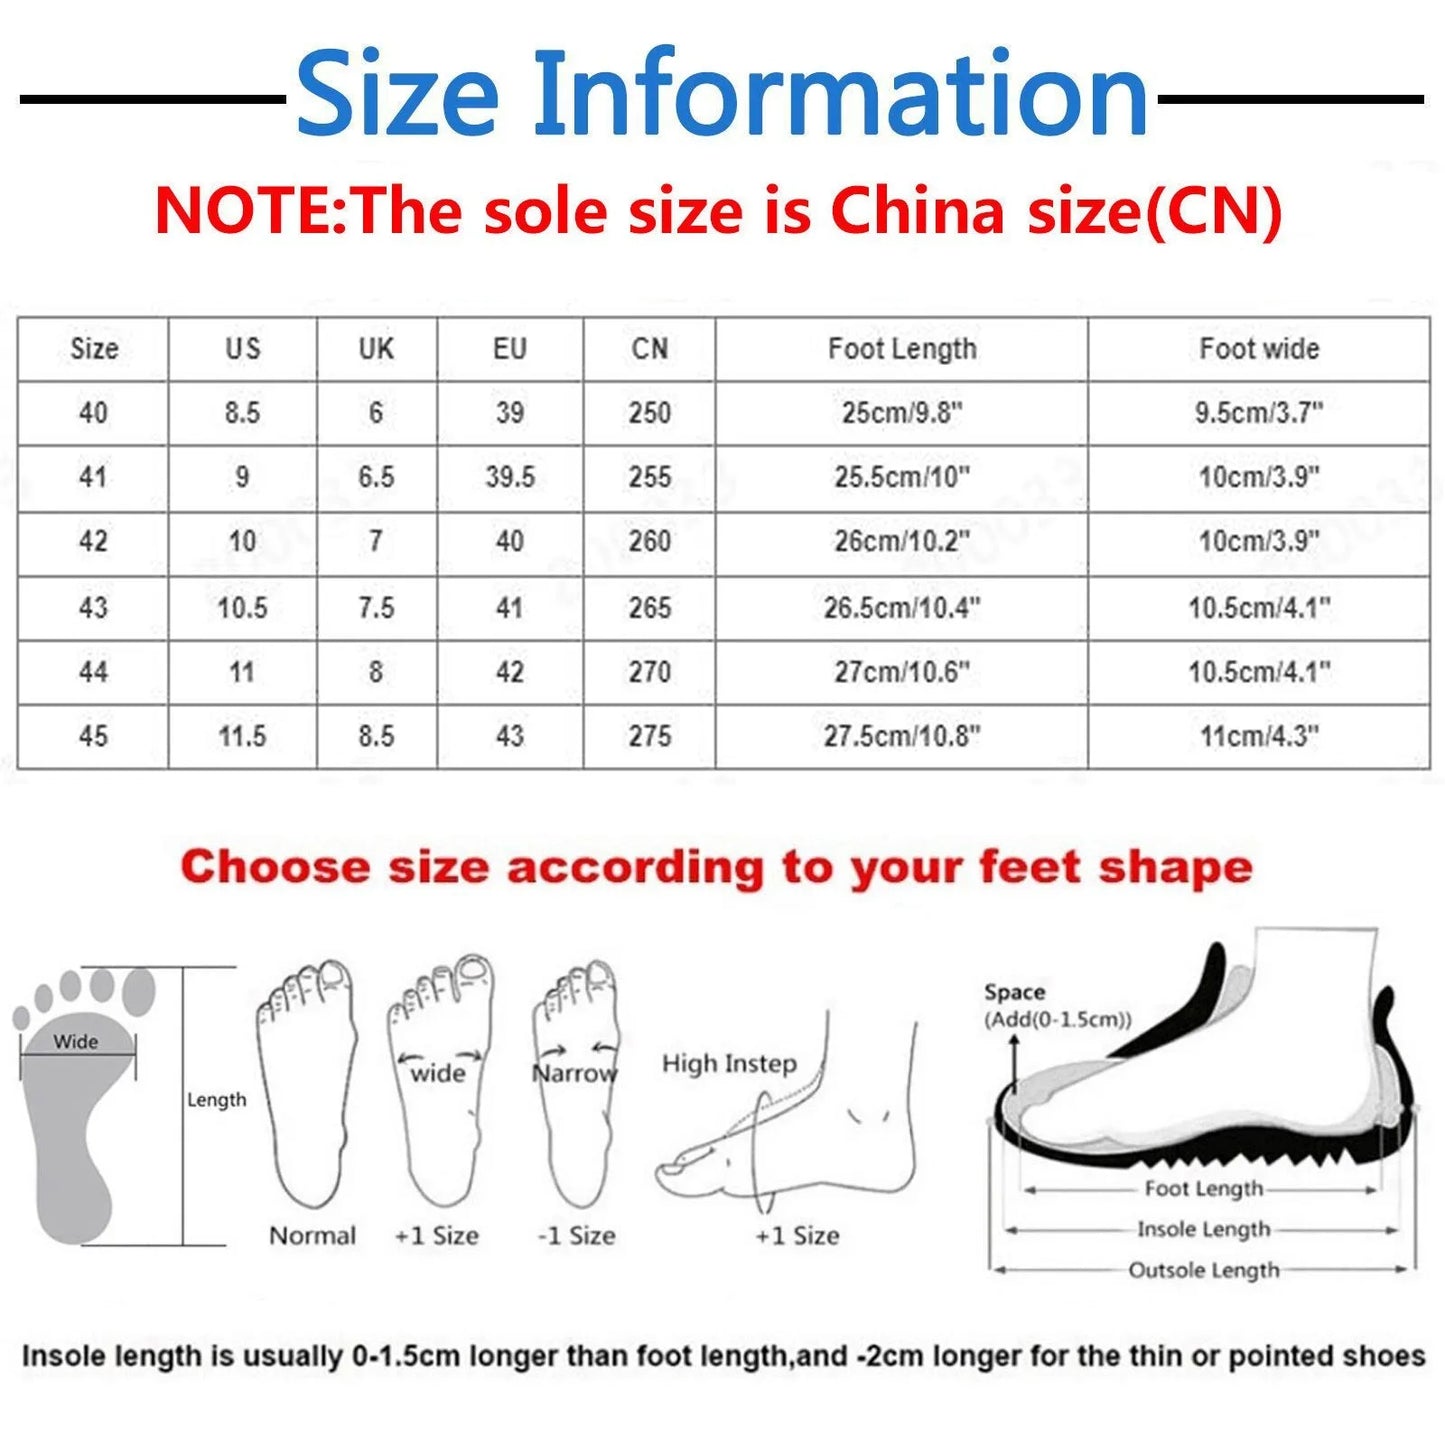 Sneakers Shoes Men Mesh Sport Shoes Lace Up Solid Color/Running Breathable Sneakers Thick Sole Platform Men's Sneakers